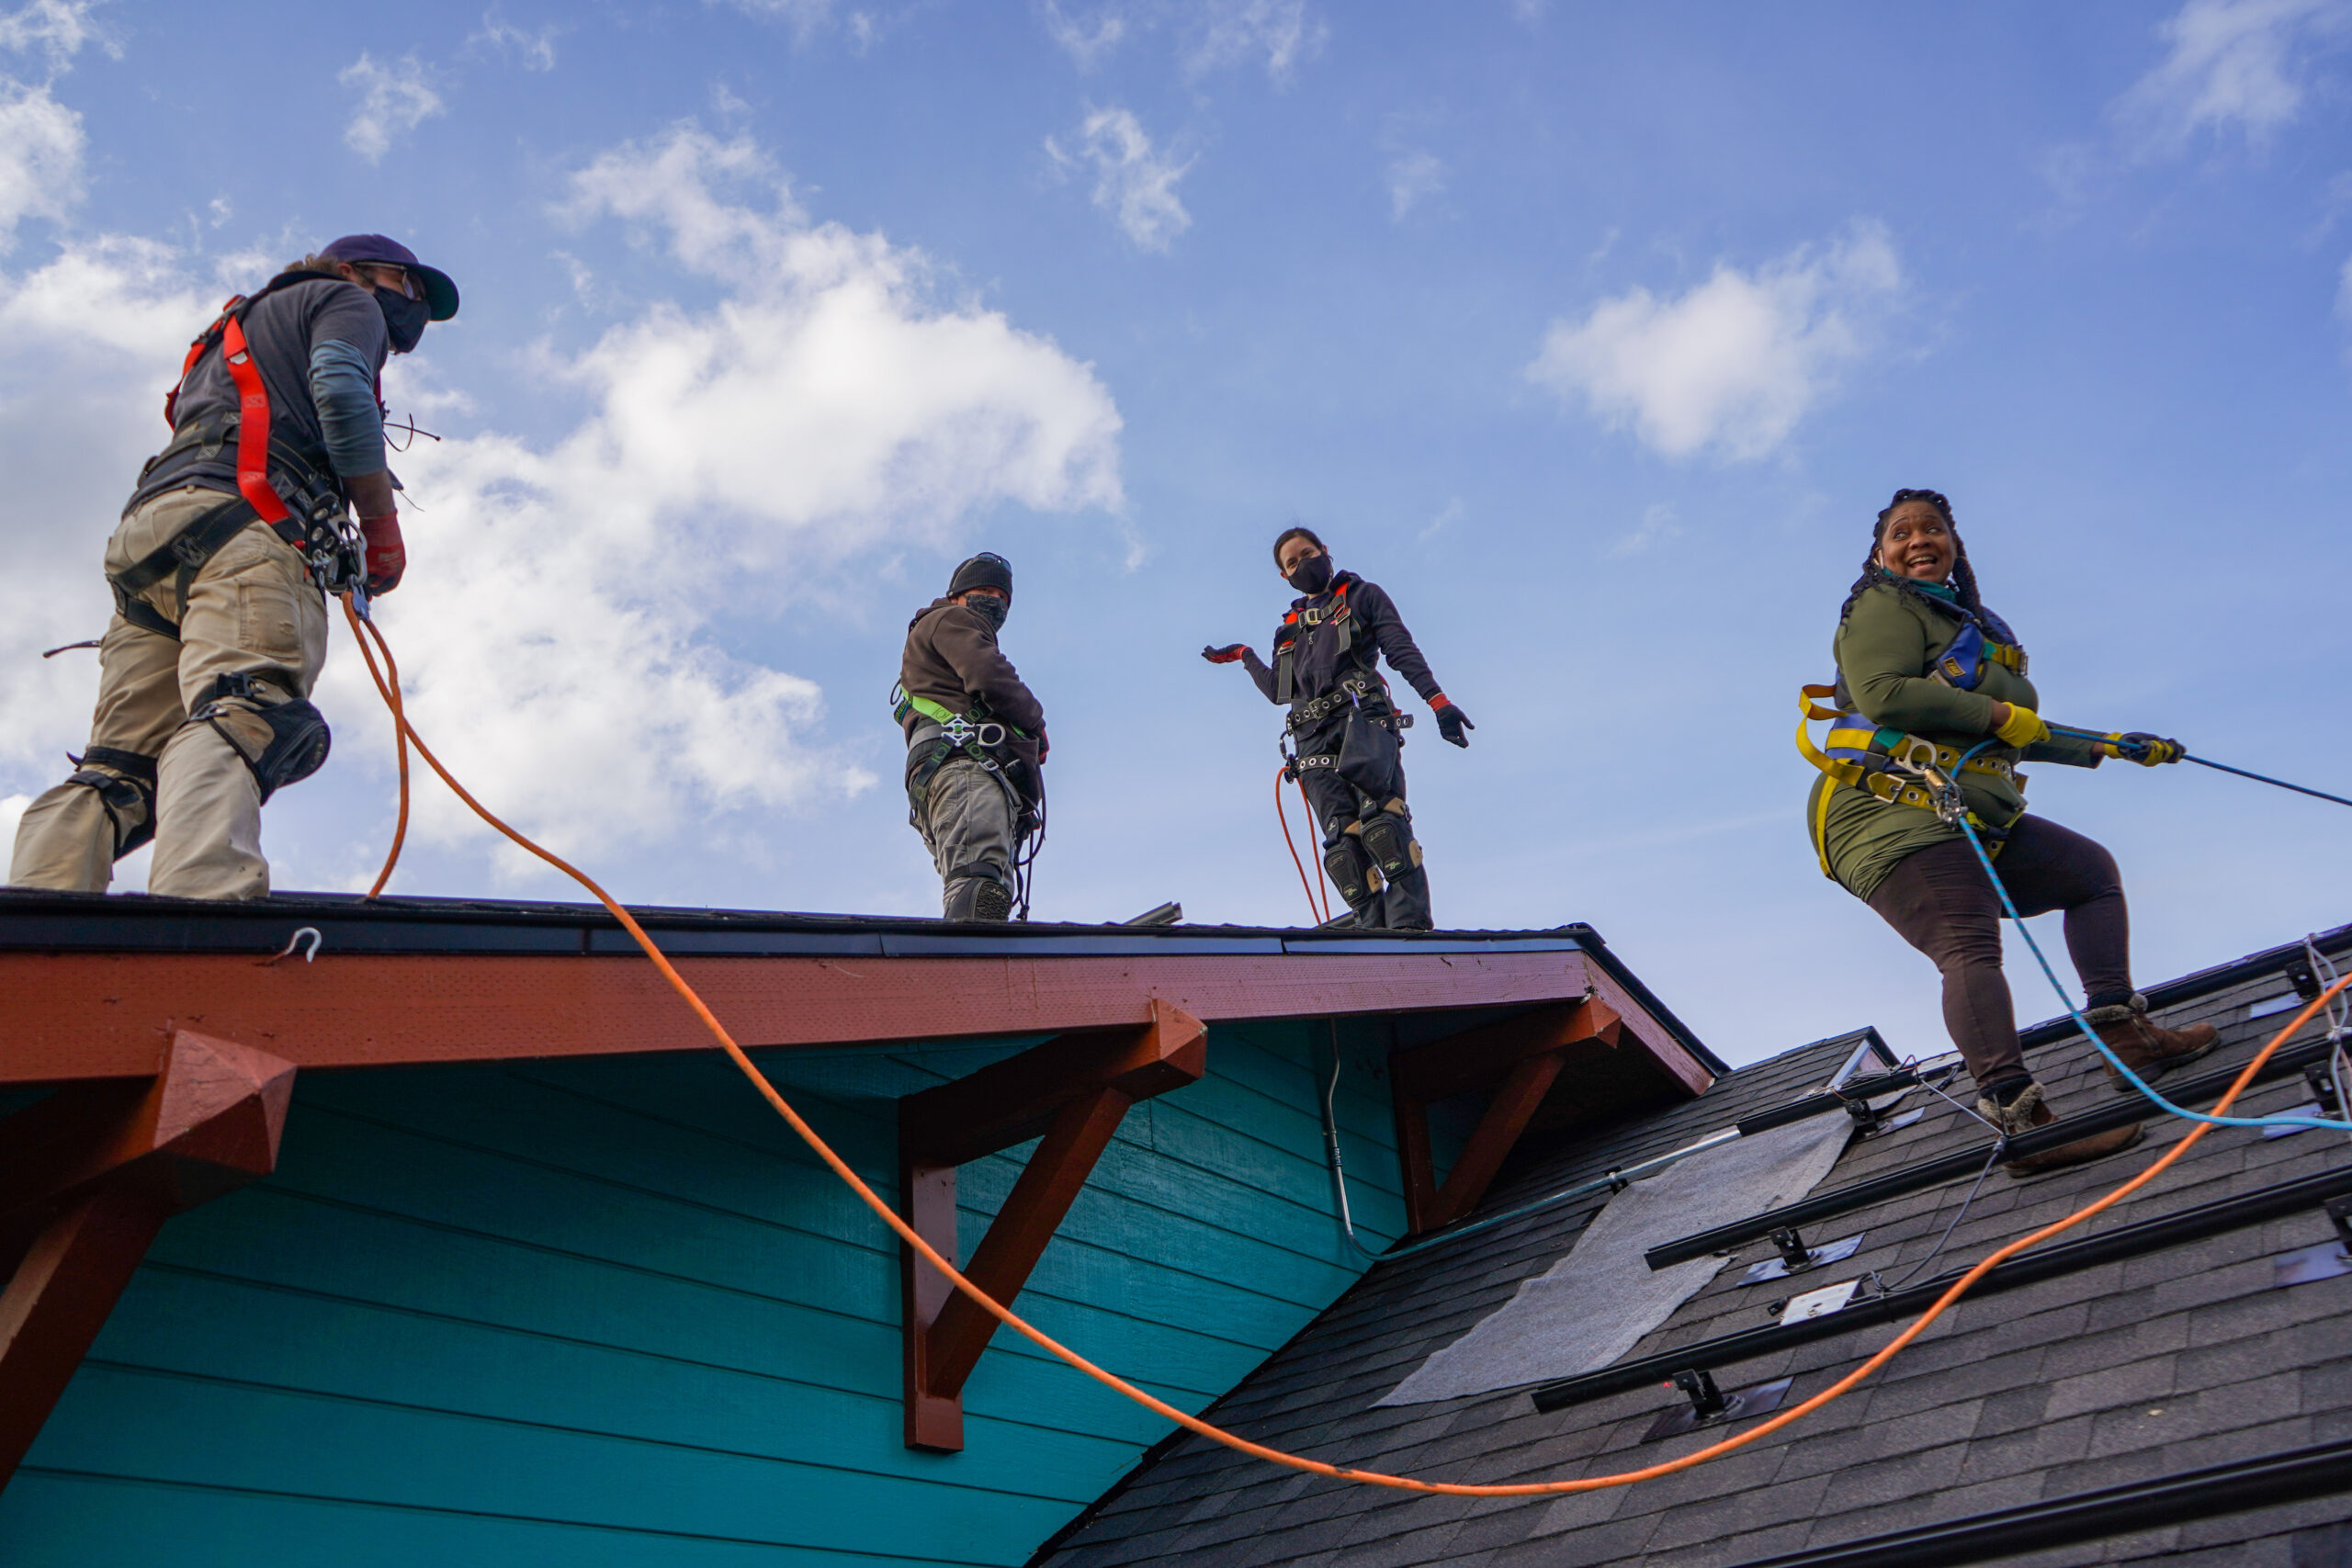 Shawna and the South Sound Solar crew on the Media Island roof.